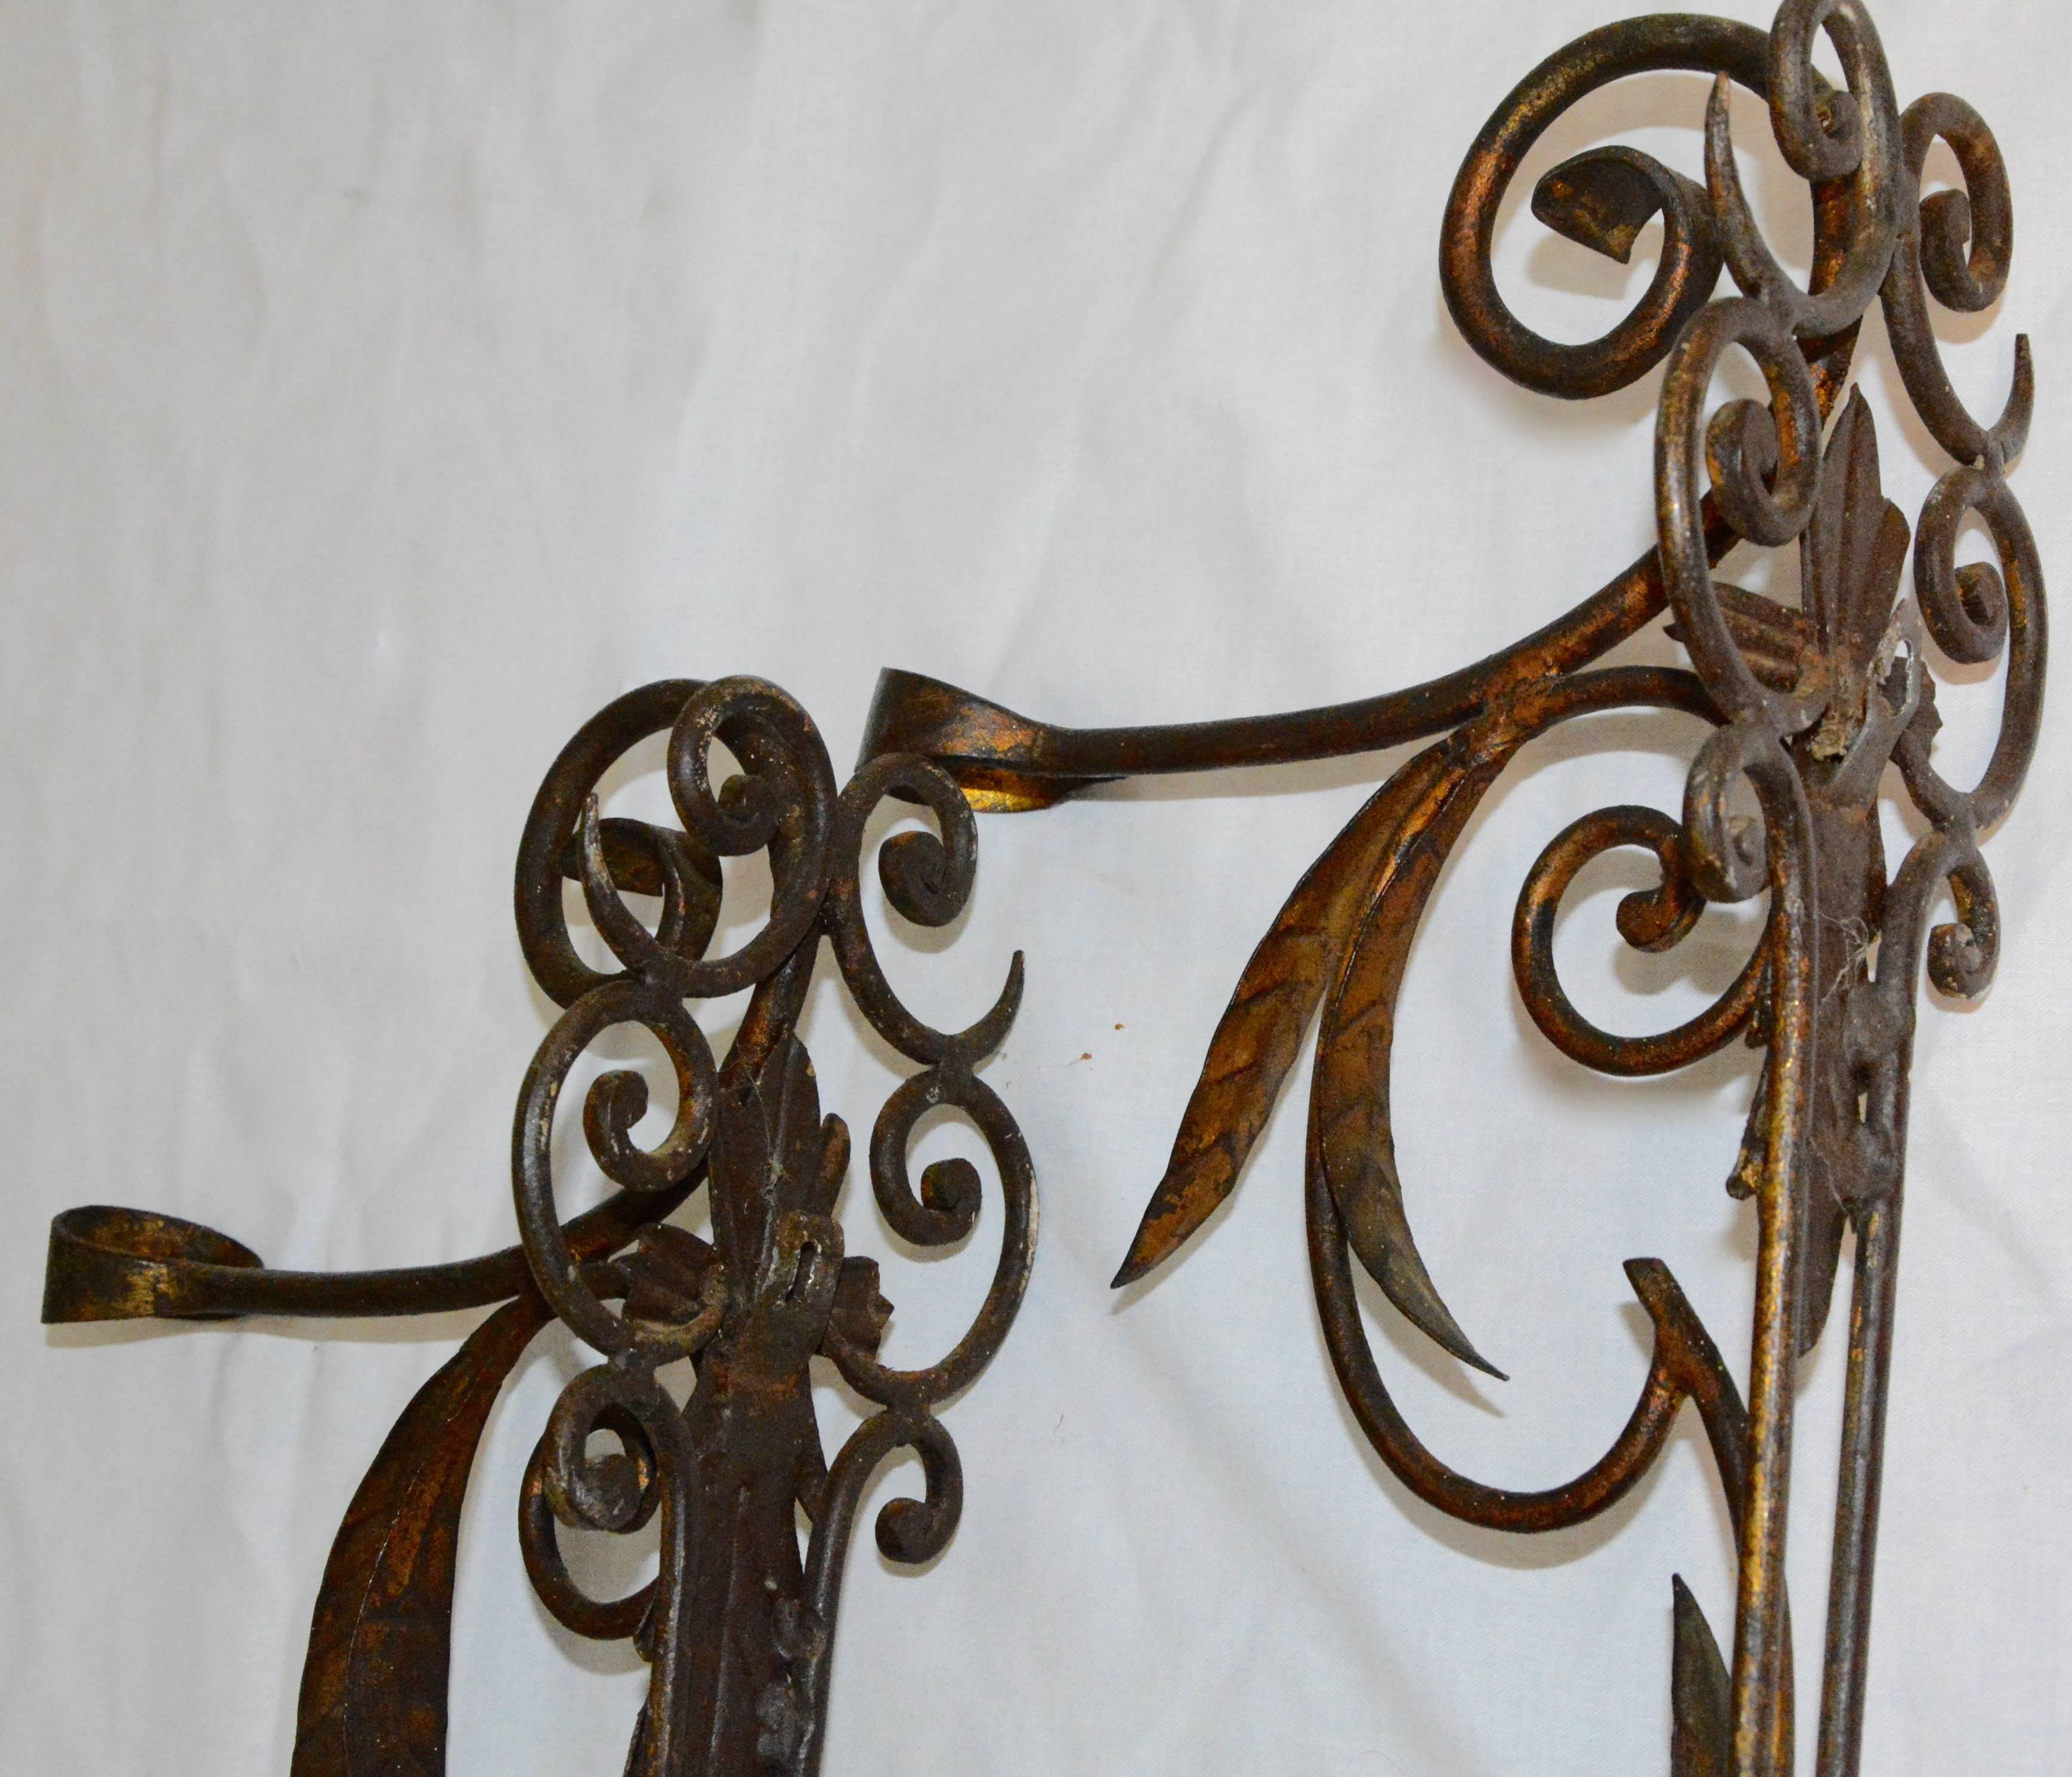 Metal Candleholder Wall Sconces with Foliate and Scrolls In Good Condition For Sale In Cookeville, TN